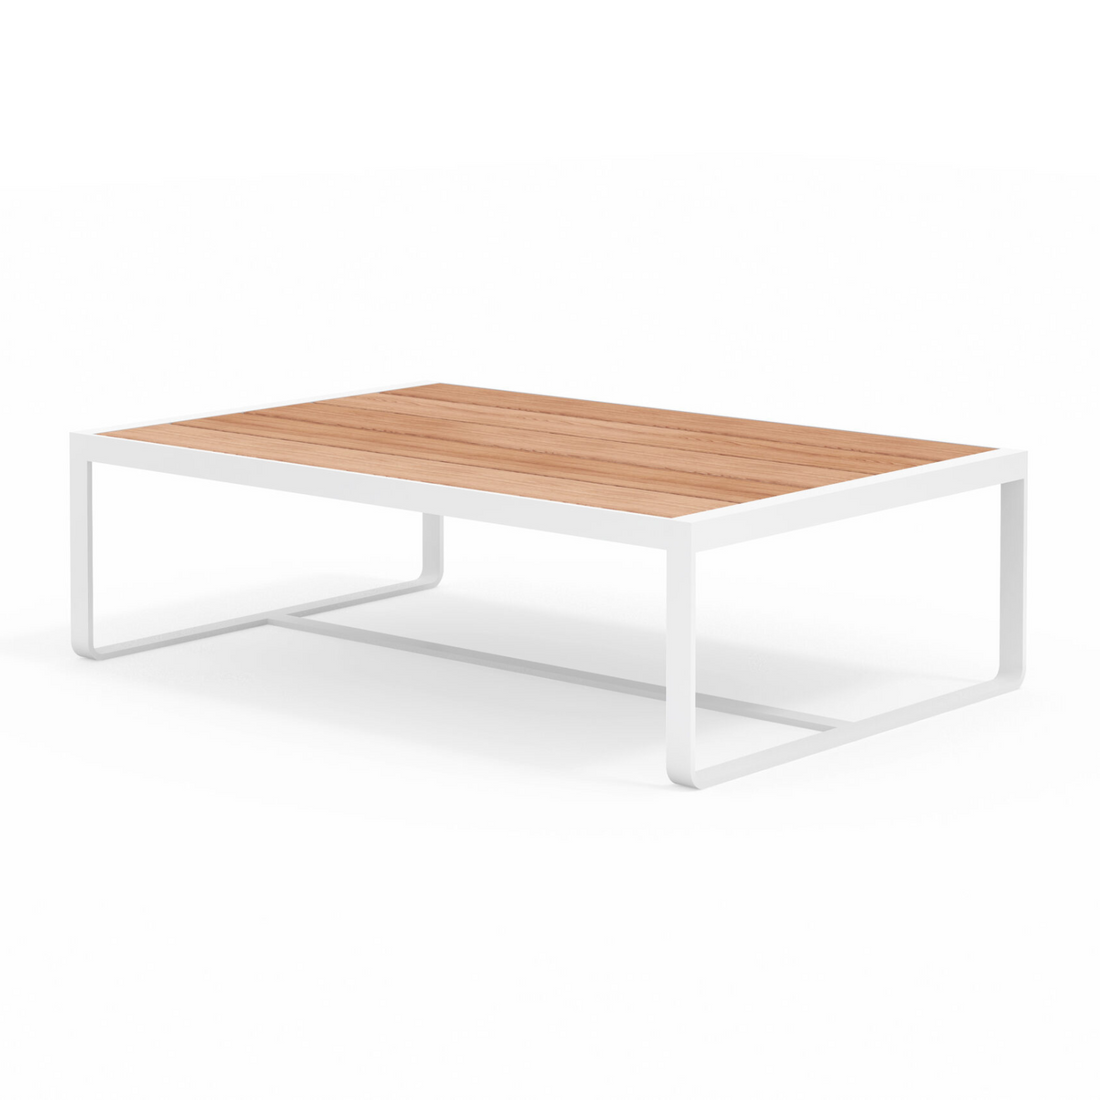 Sit | Outdoor Low Table